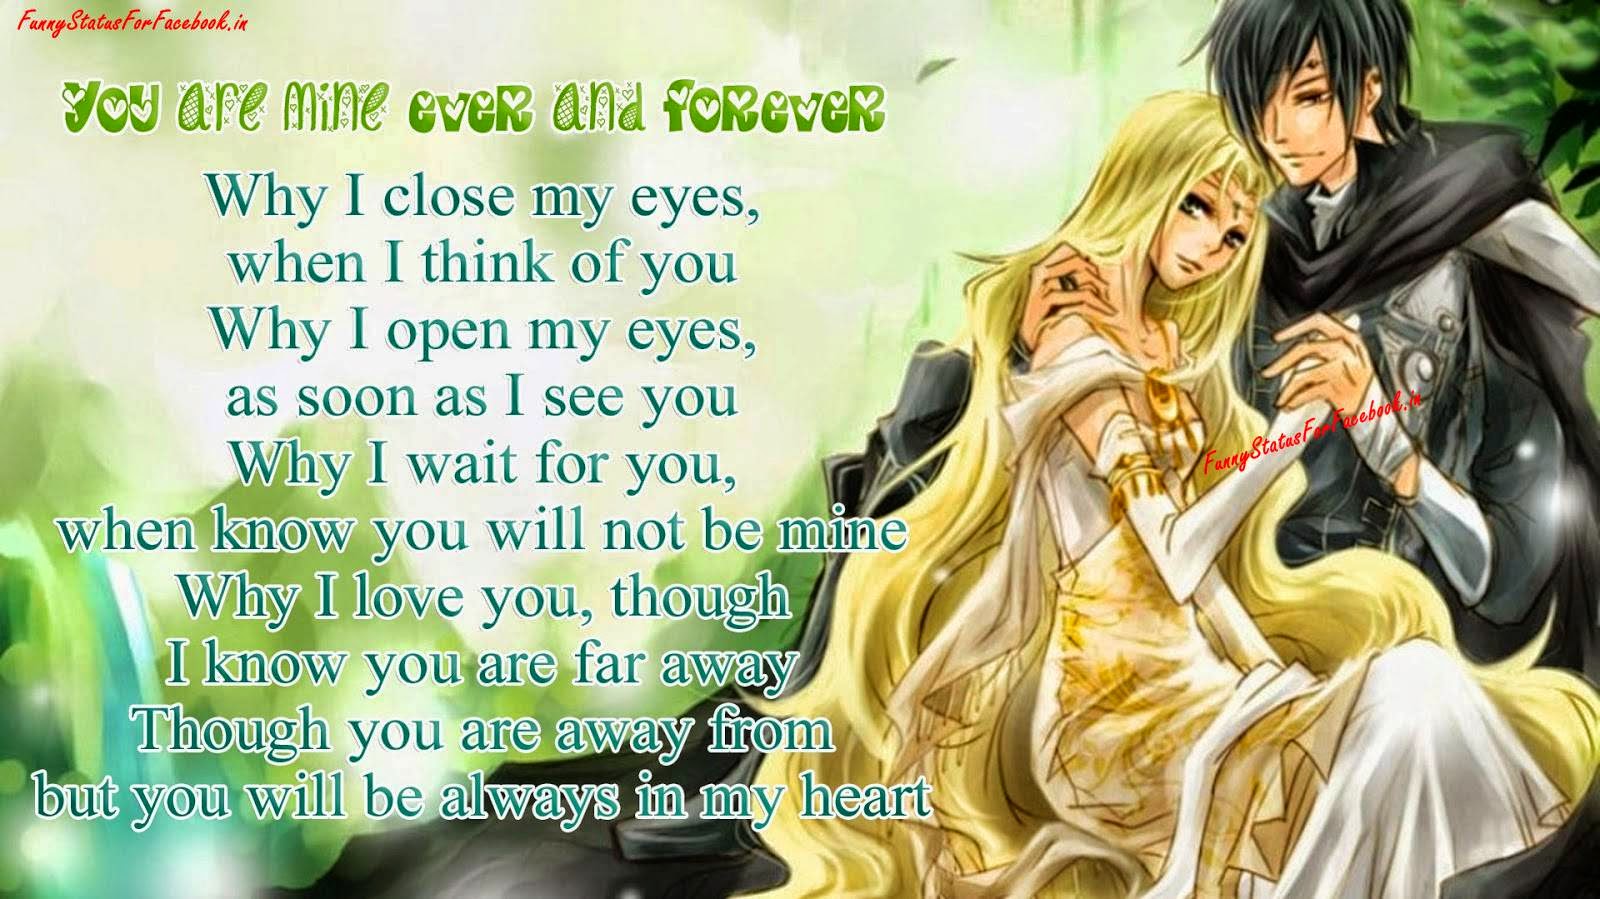 You are mine ever and forever Why I close my eyes, when I think of you Why I open my eyes, as soon as I see you Why I wait for you, when know you will not be mine Why I love you, though I know you are far away Though you are away from but you will be always in my heart...!!!